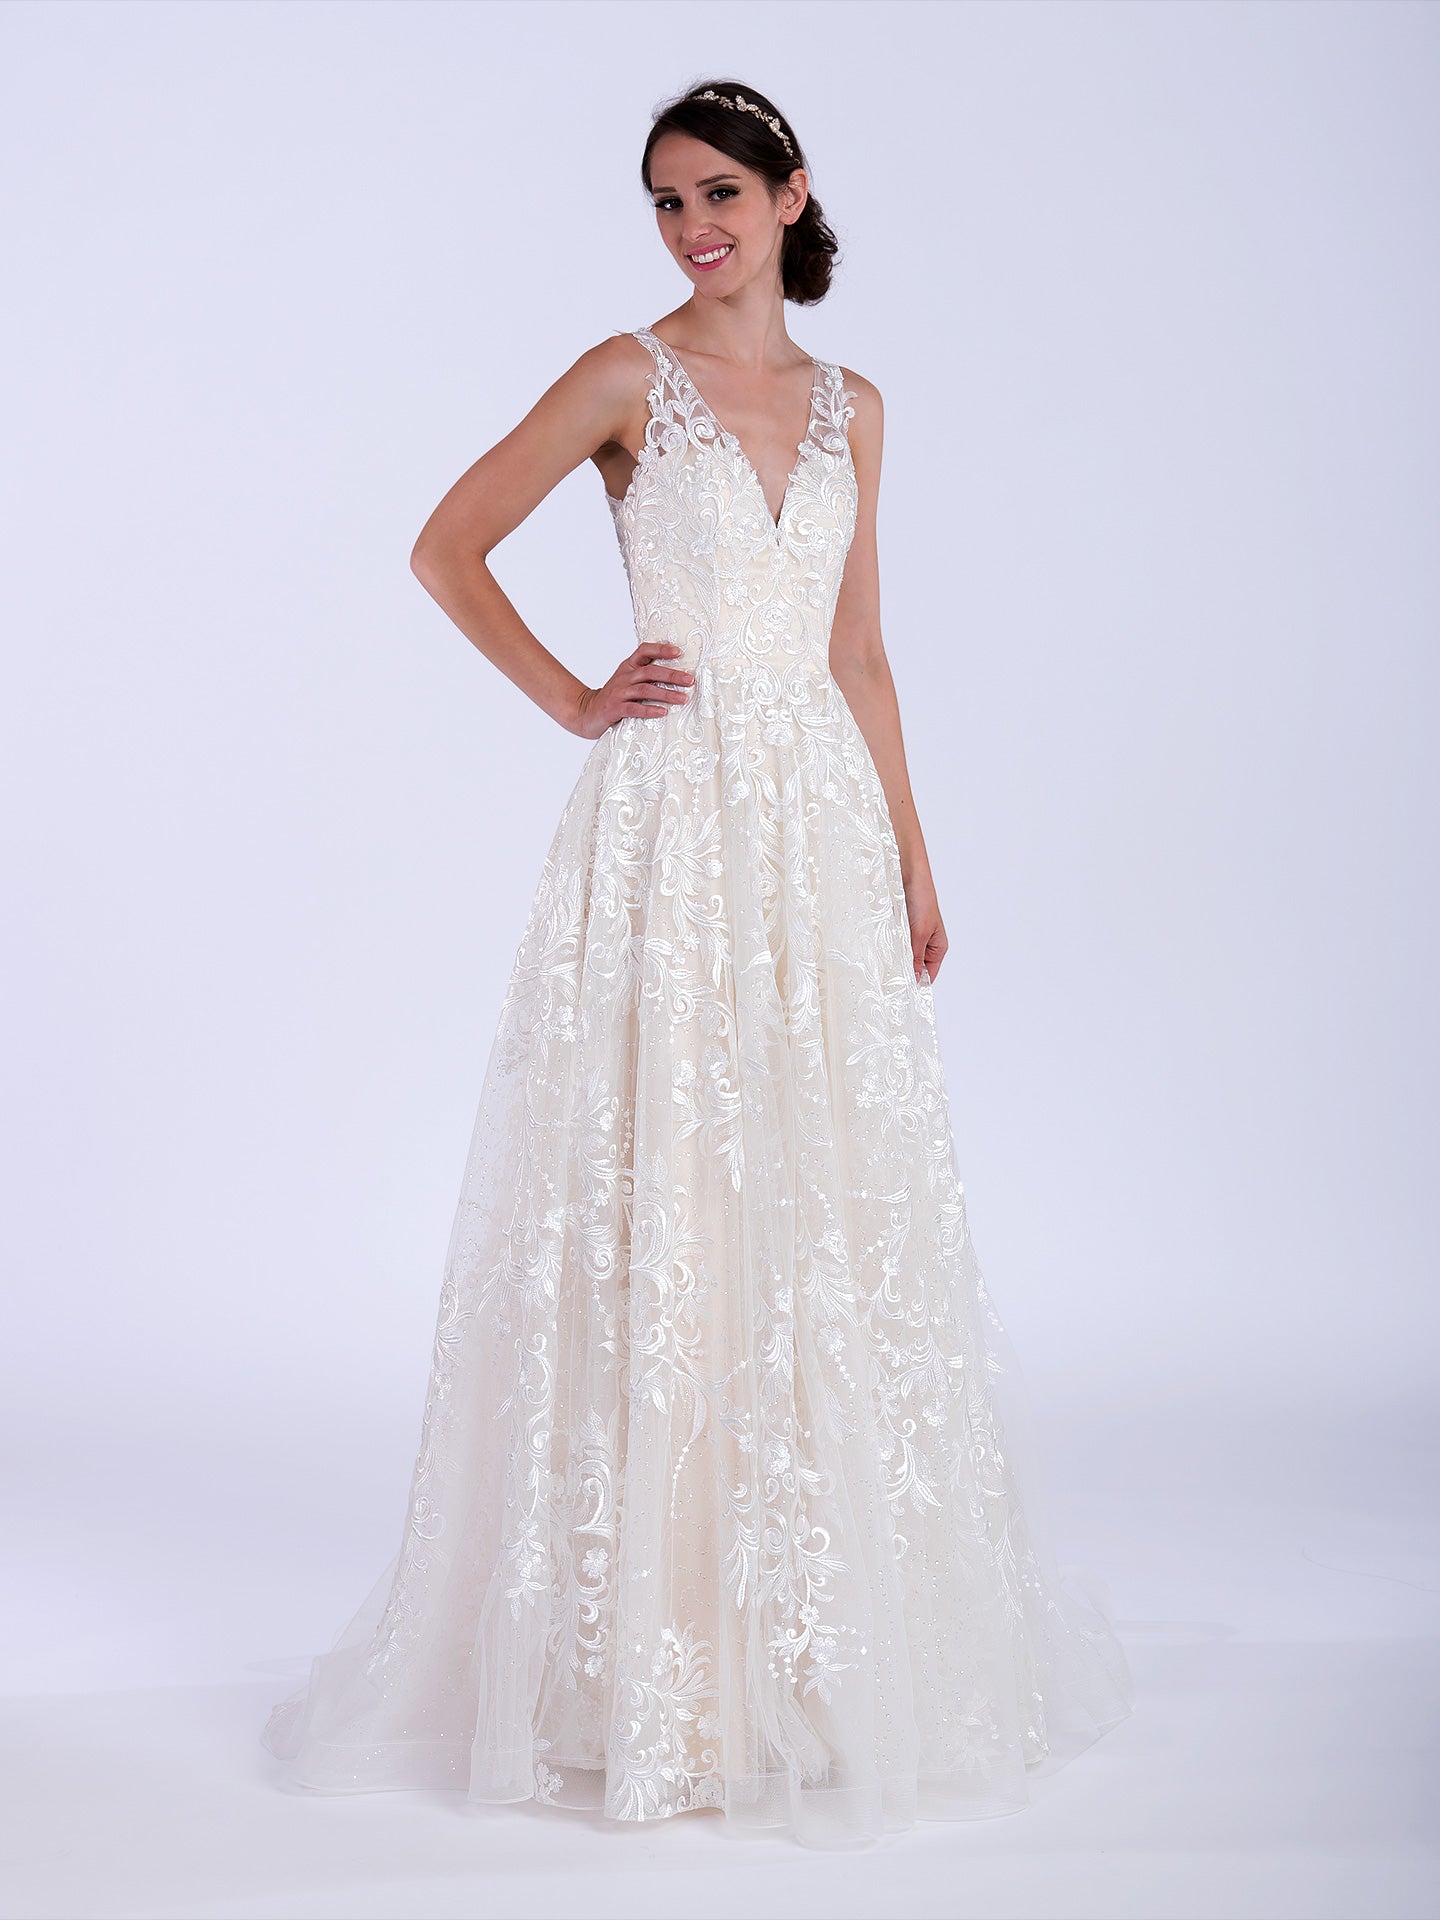 Lace wedding dress 4079 with sequins